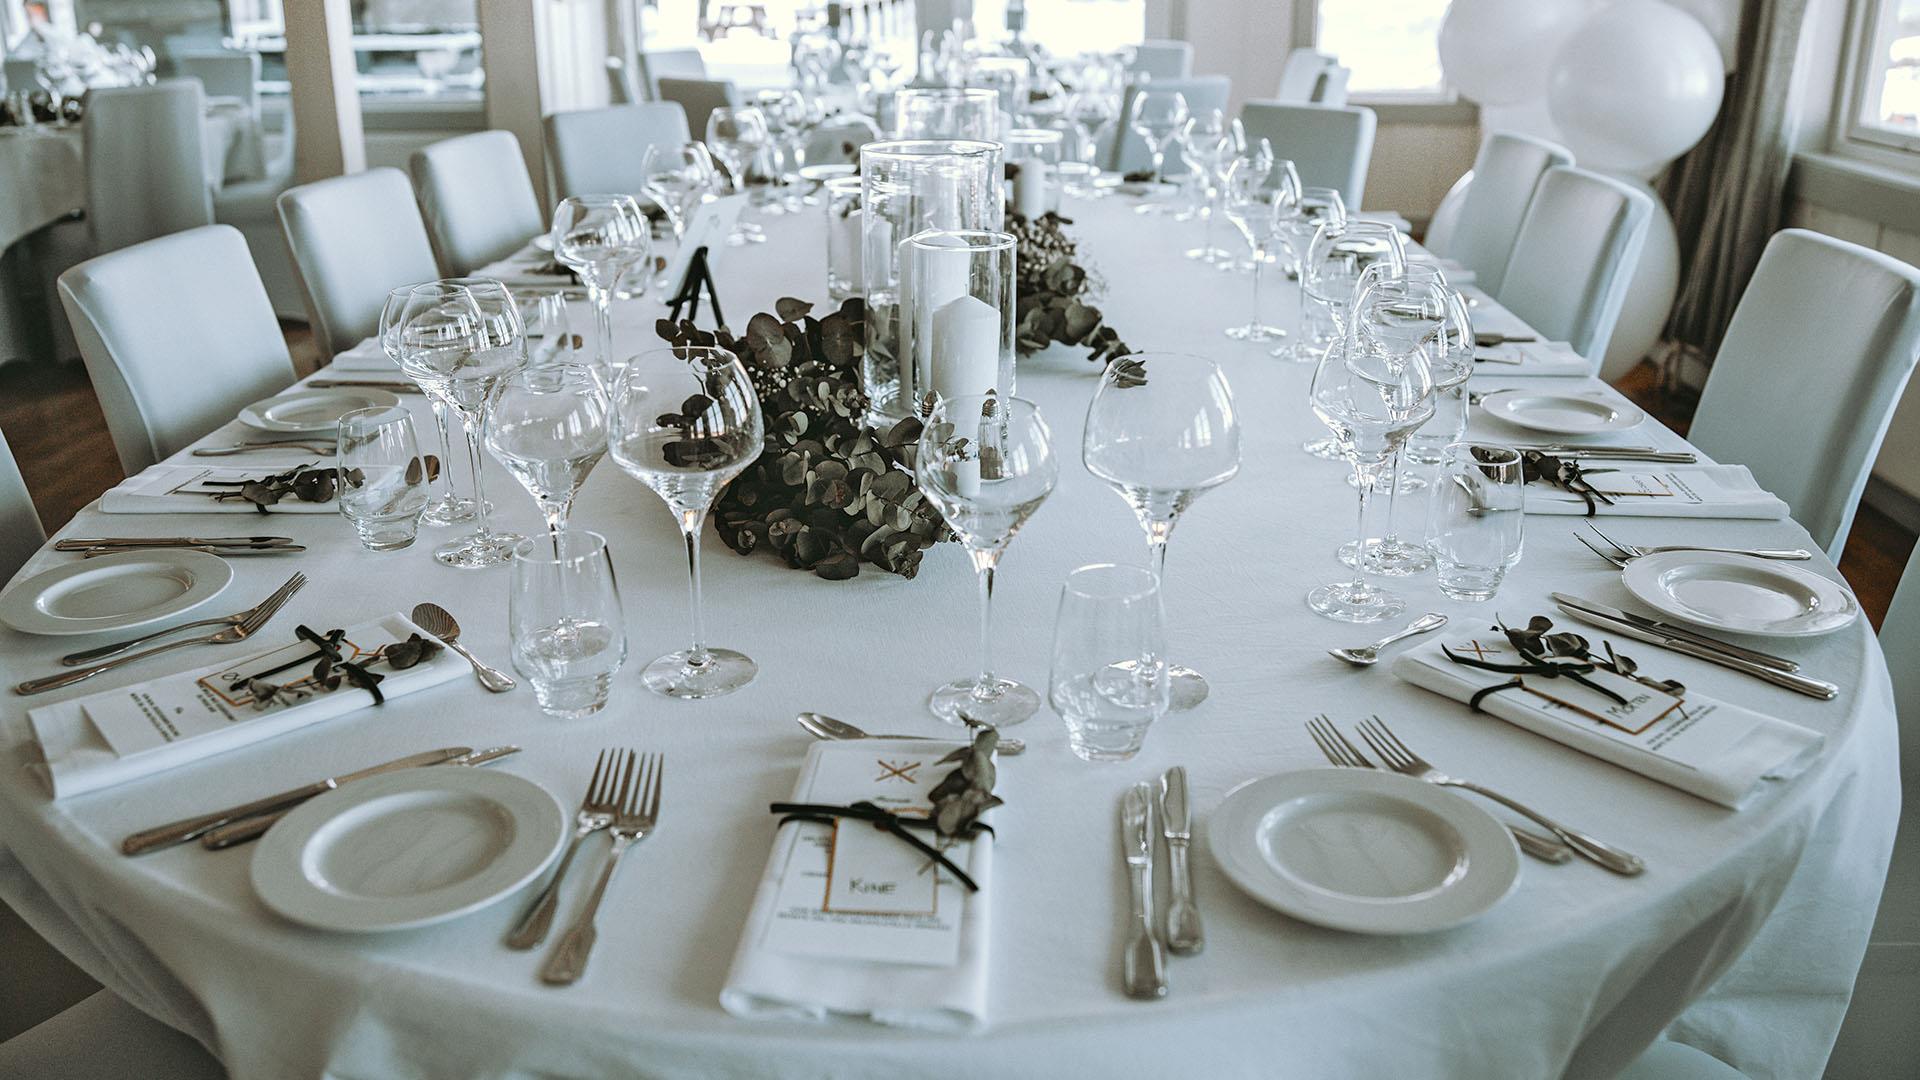 Longtable decorated for a wedding party